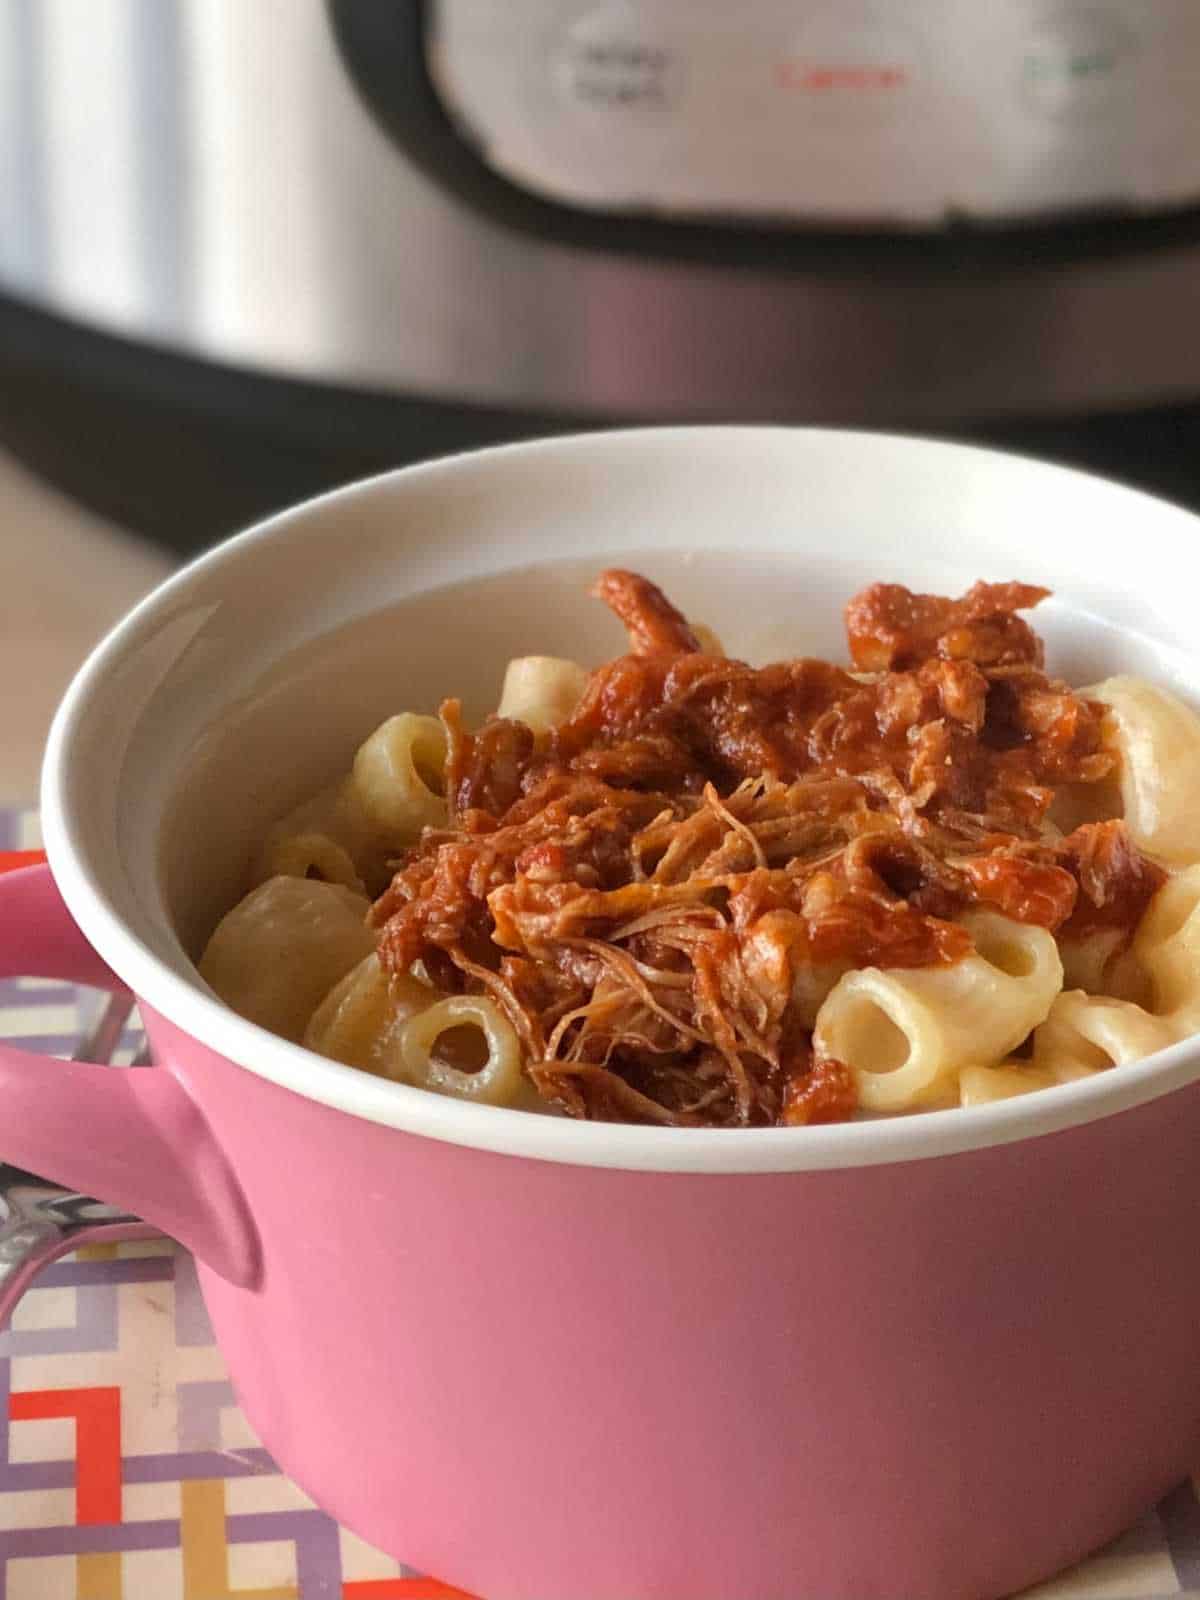 Photo of Jayson's Mac and Cheese served in a pink pot with handles topped with pulled pork, with an Instant Pot in the background